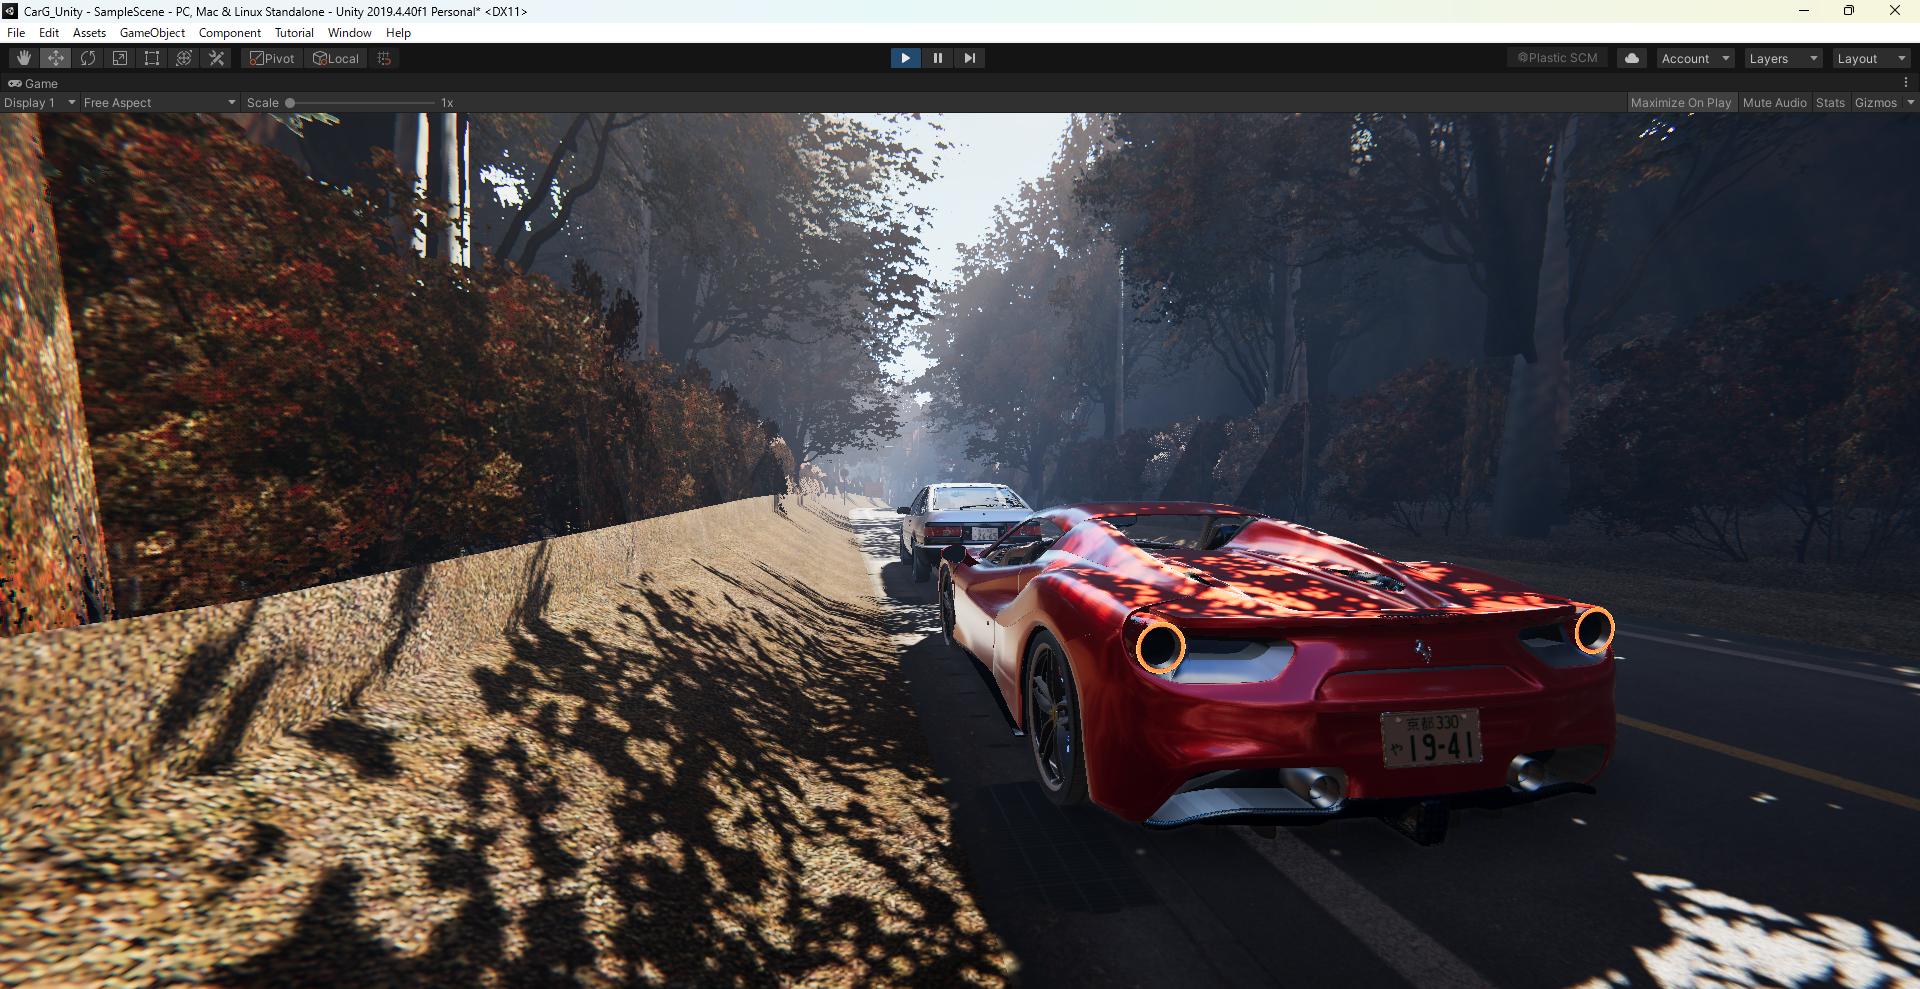 CarG_Unity - SampleScene - PC, Mac & Linux Standalone - Unity 2019.4.40f1 Personal_ DX11 2022_12_12 23_07_42.png